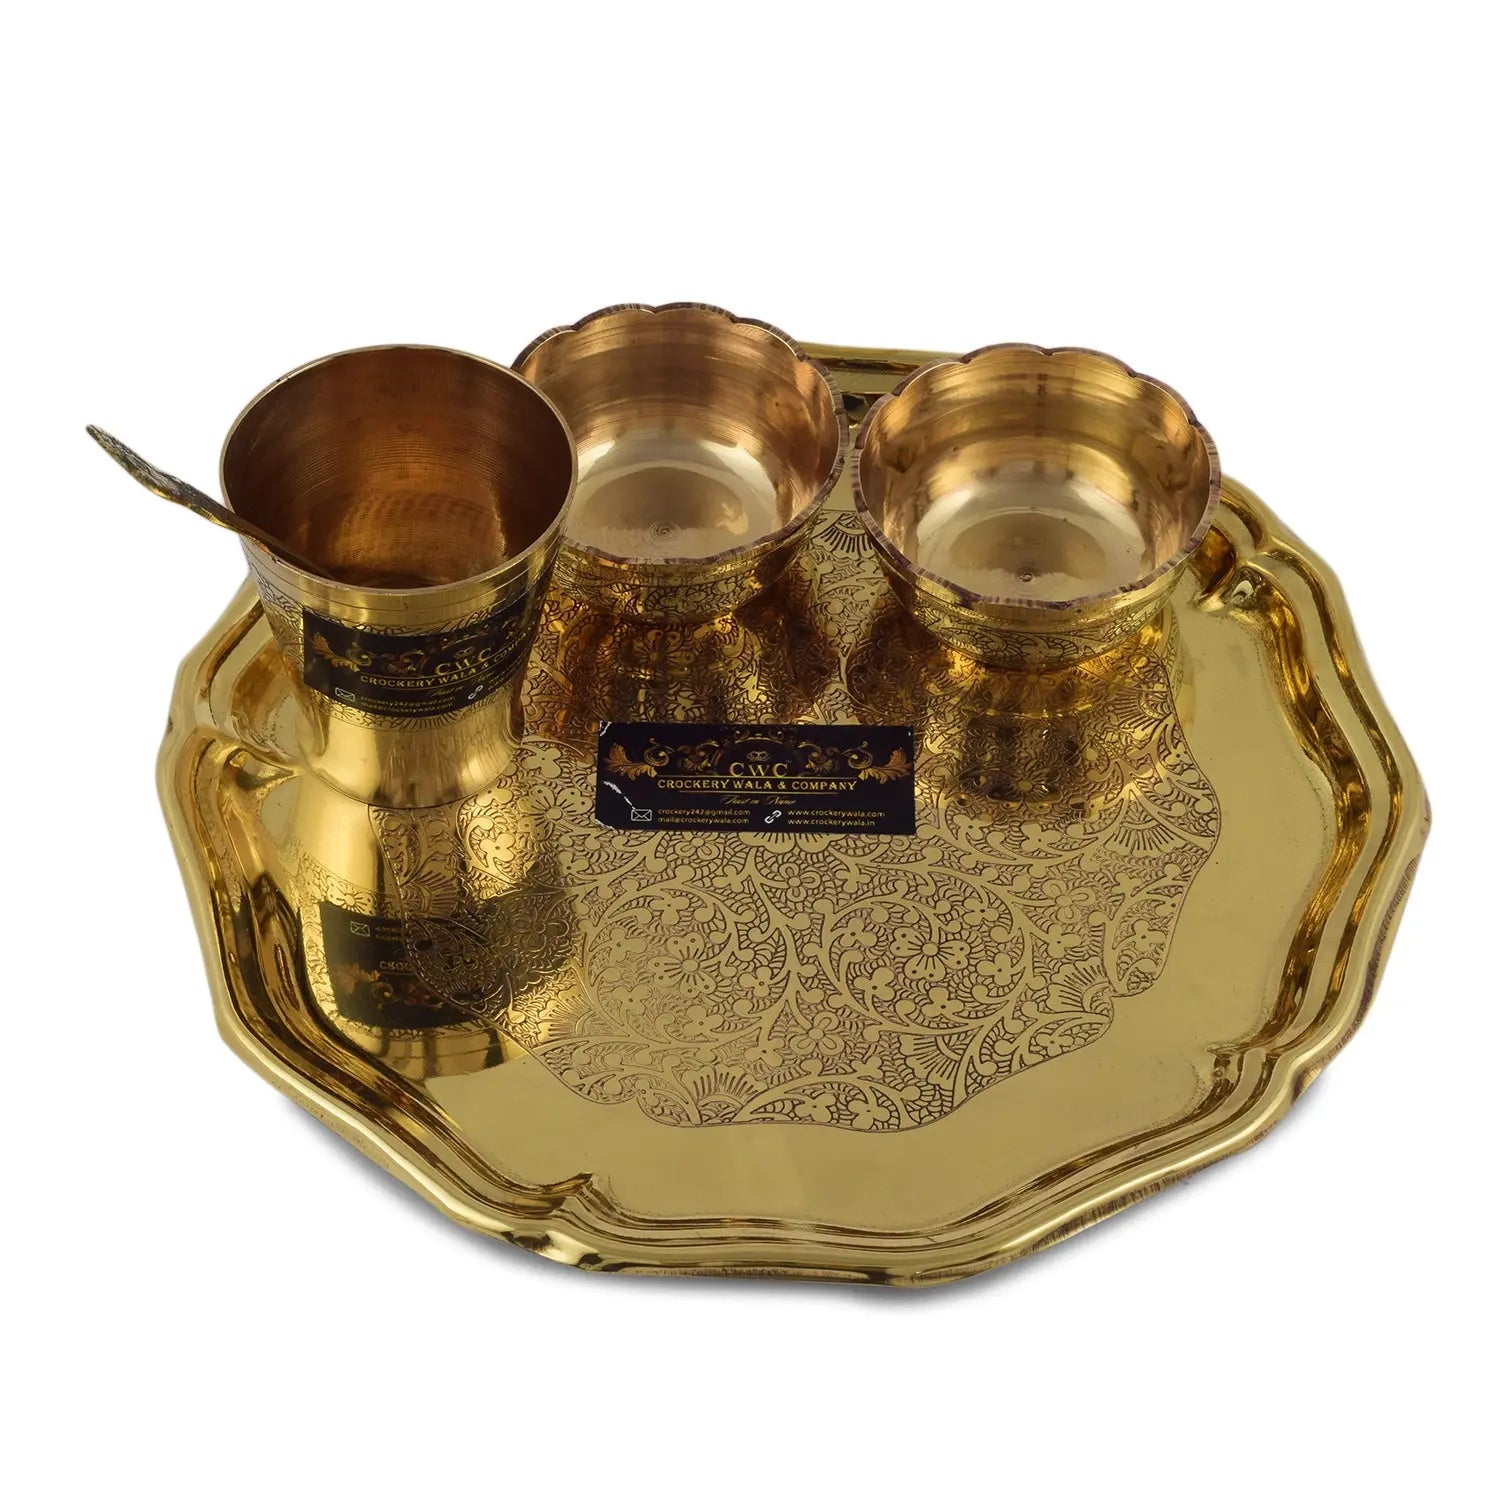 Crockery Wala And Company on X: Crockerywala Presents 🙏Pure Brass Dinner  set 70 pcs. A 💪healthy and traditional way of eating food with several  health benefits. #brass #pure #brassdinnerset #antique #crockerywala  #copper #